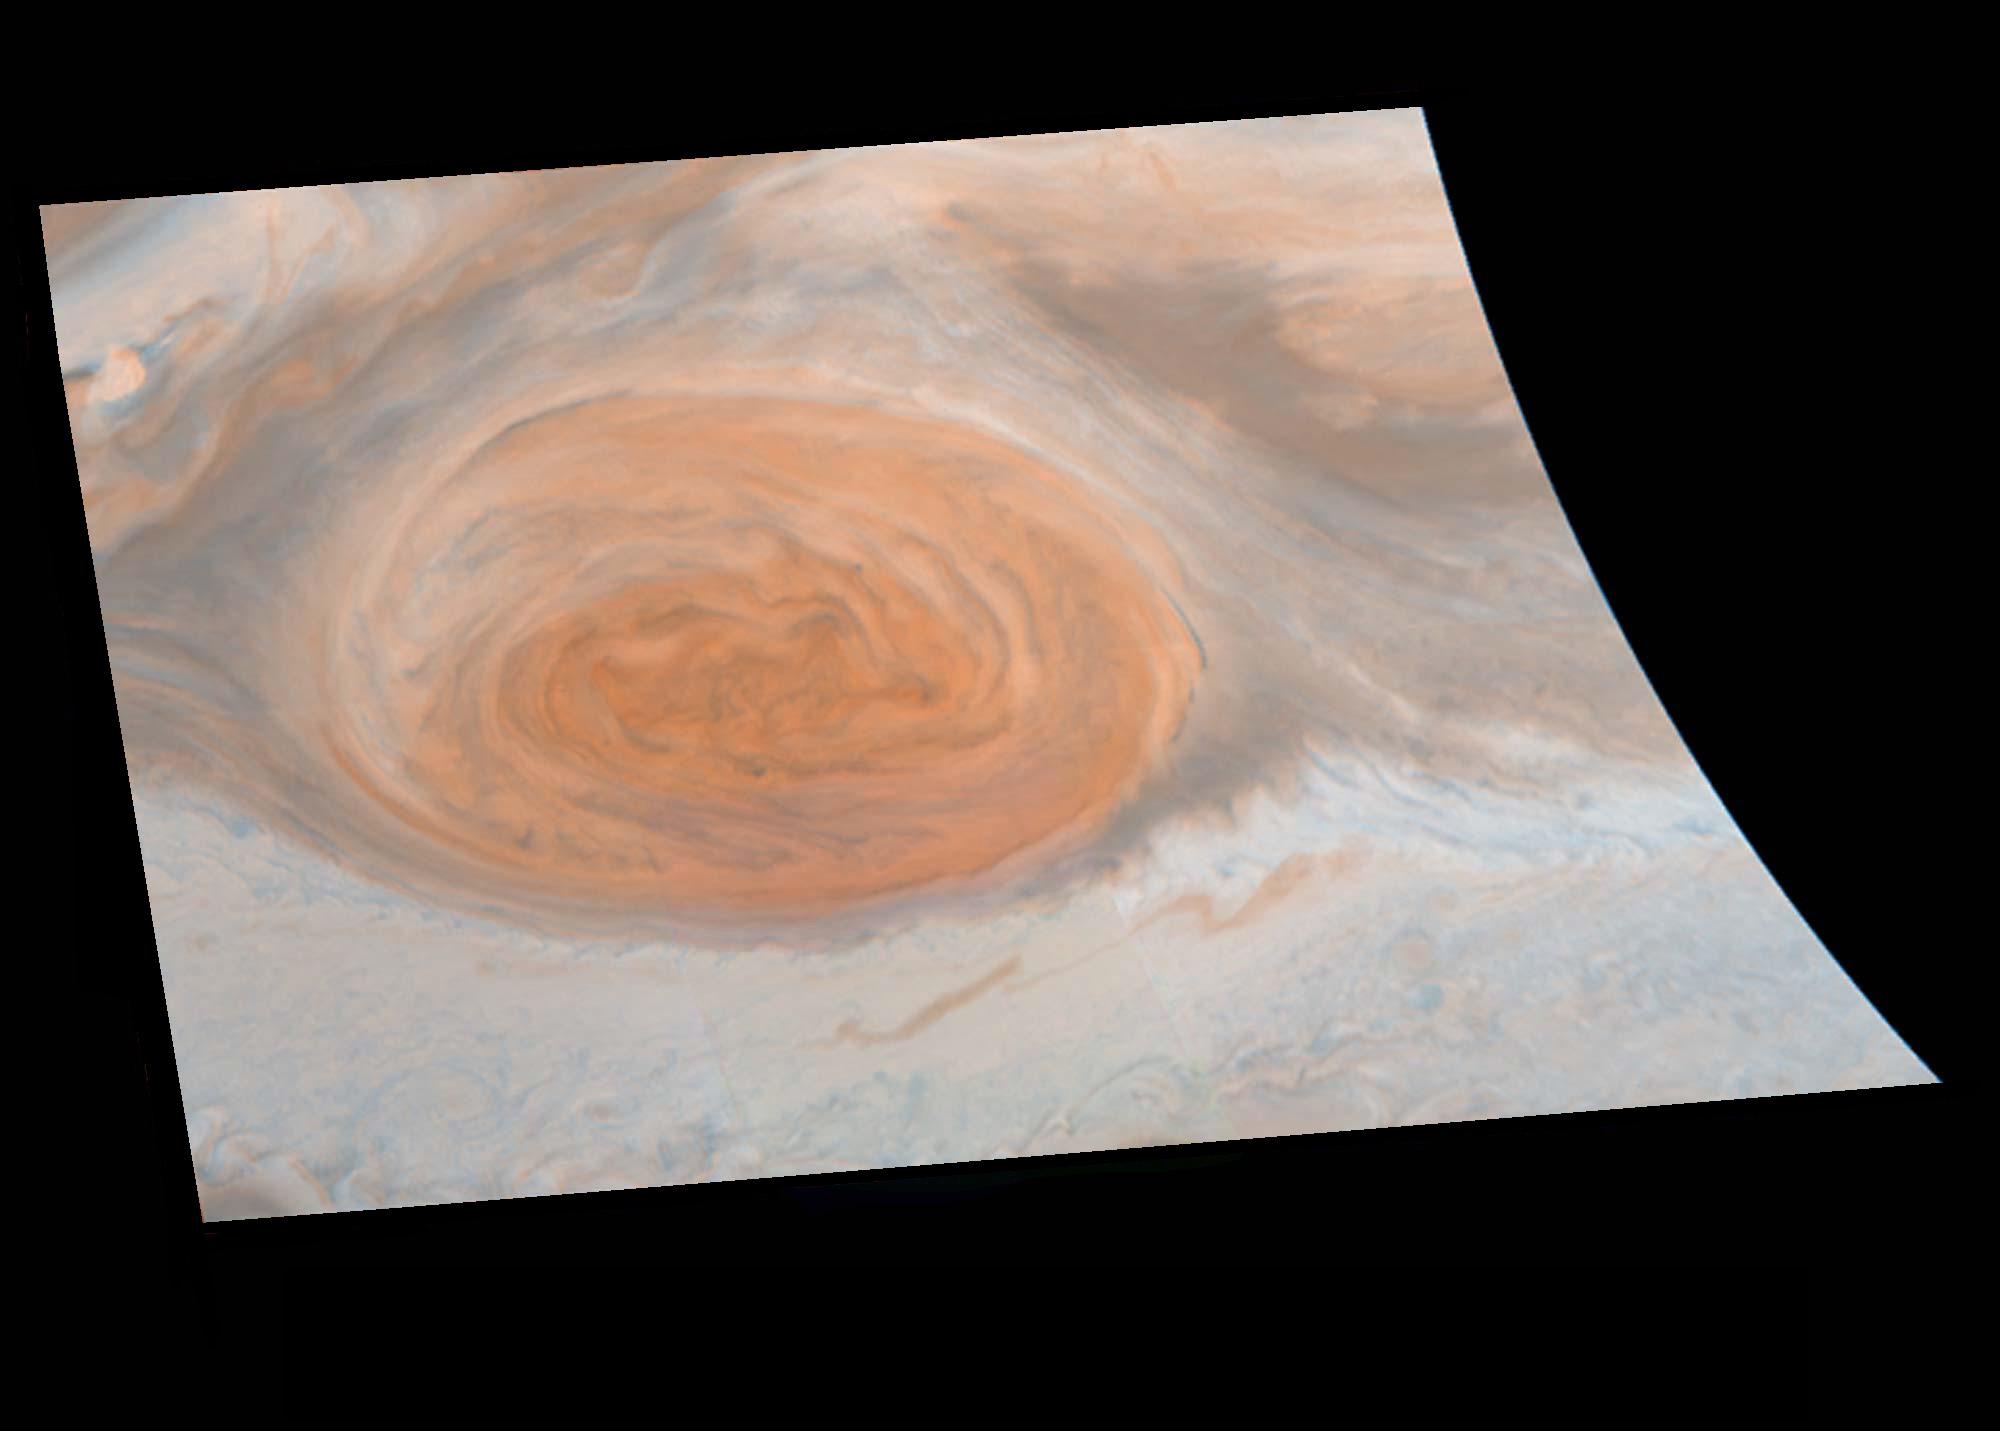 Jupiter's Great Red Spot has a faint orange blush in this close up image of the storm and surrounding swirling clouds.